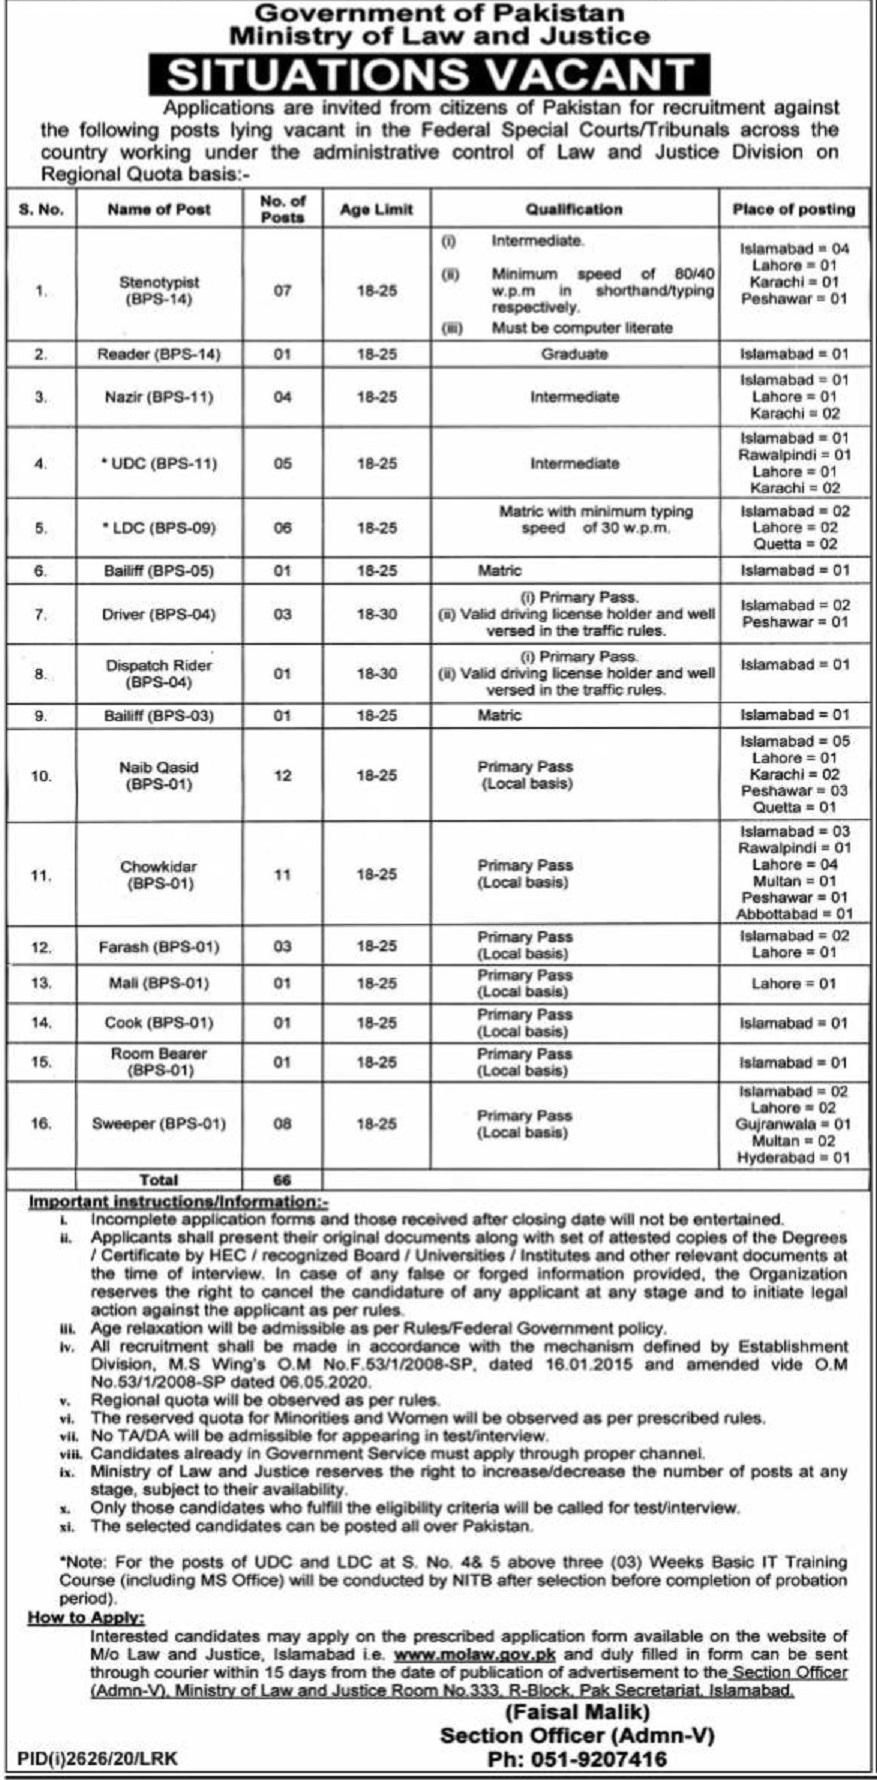 Ministry of Law and Justice Jobs November 2020 Application Form Stenotypists, Clerks 